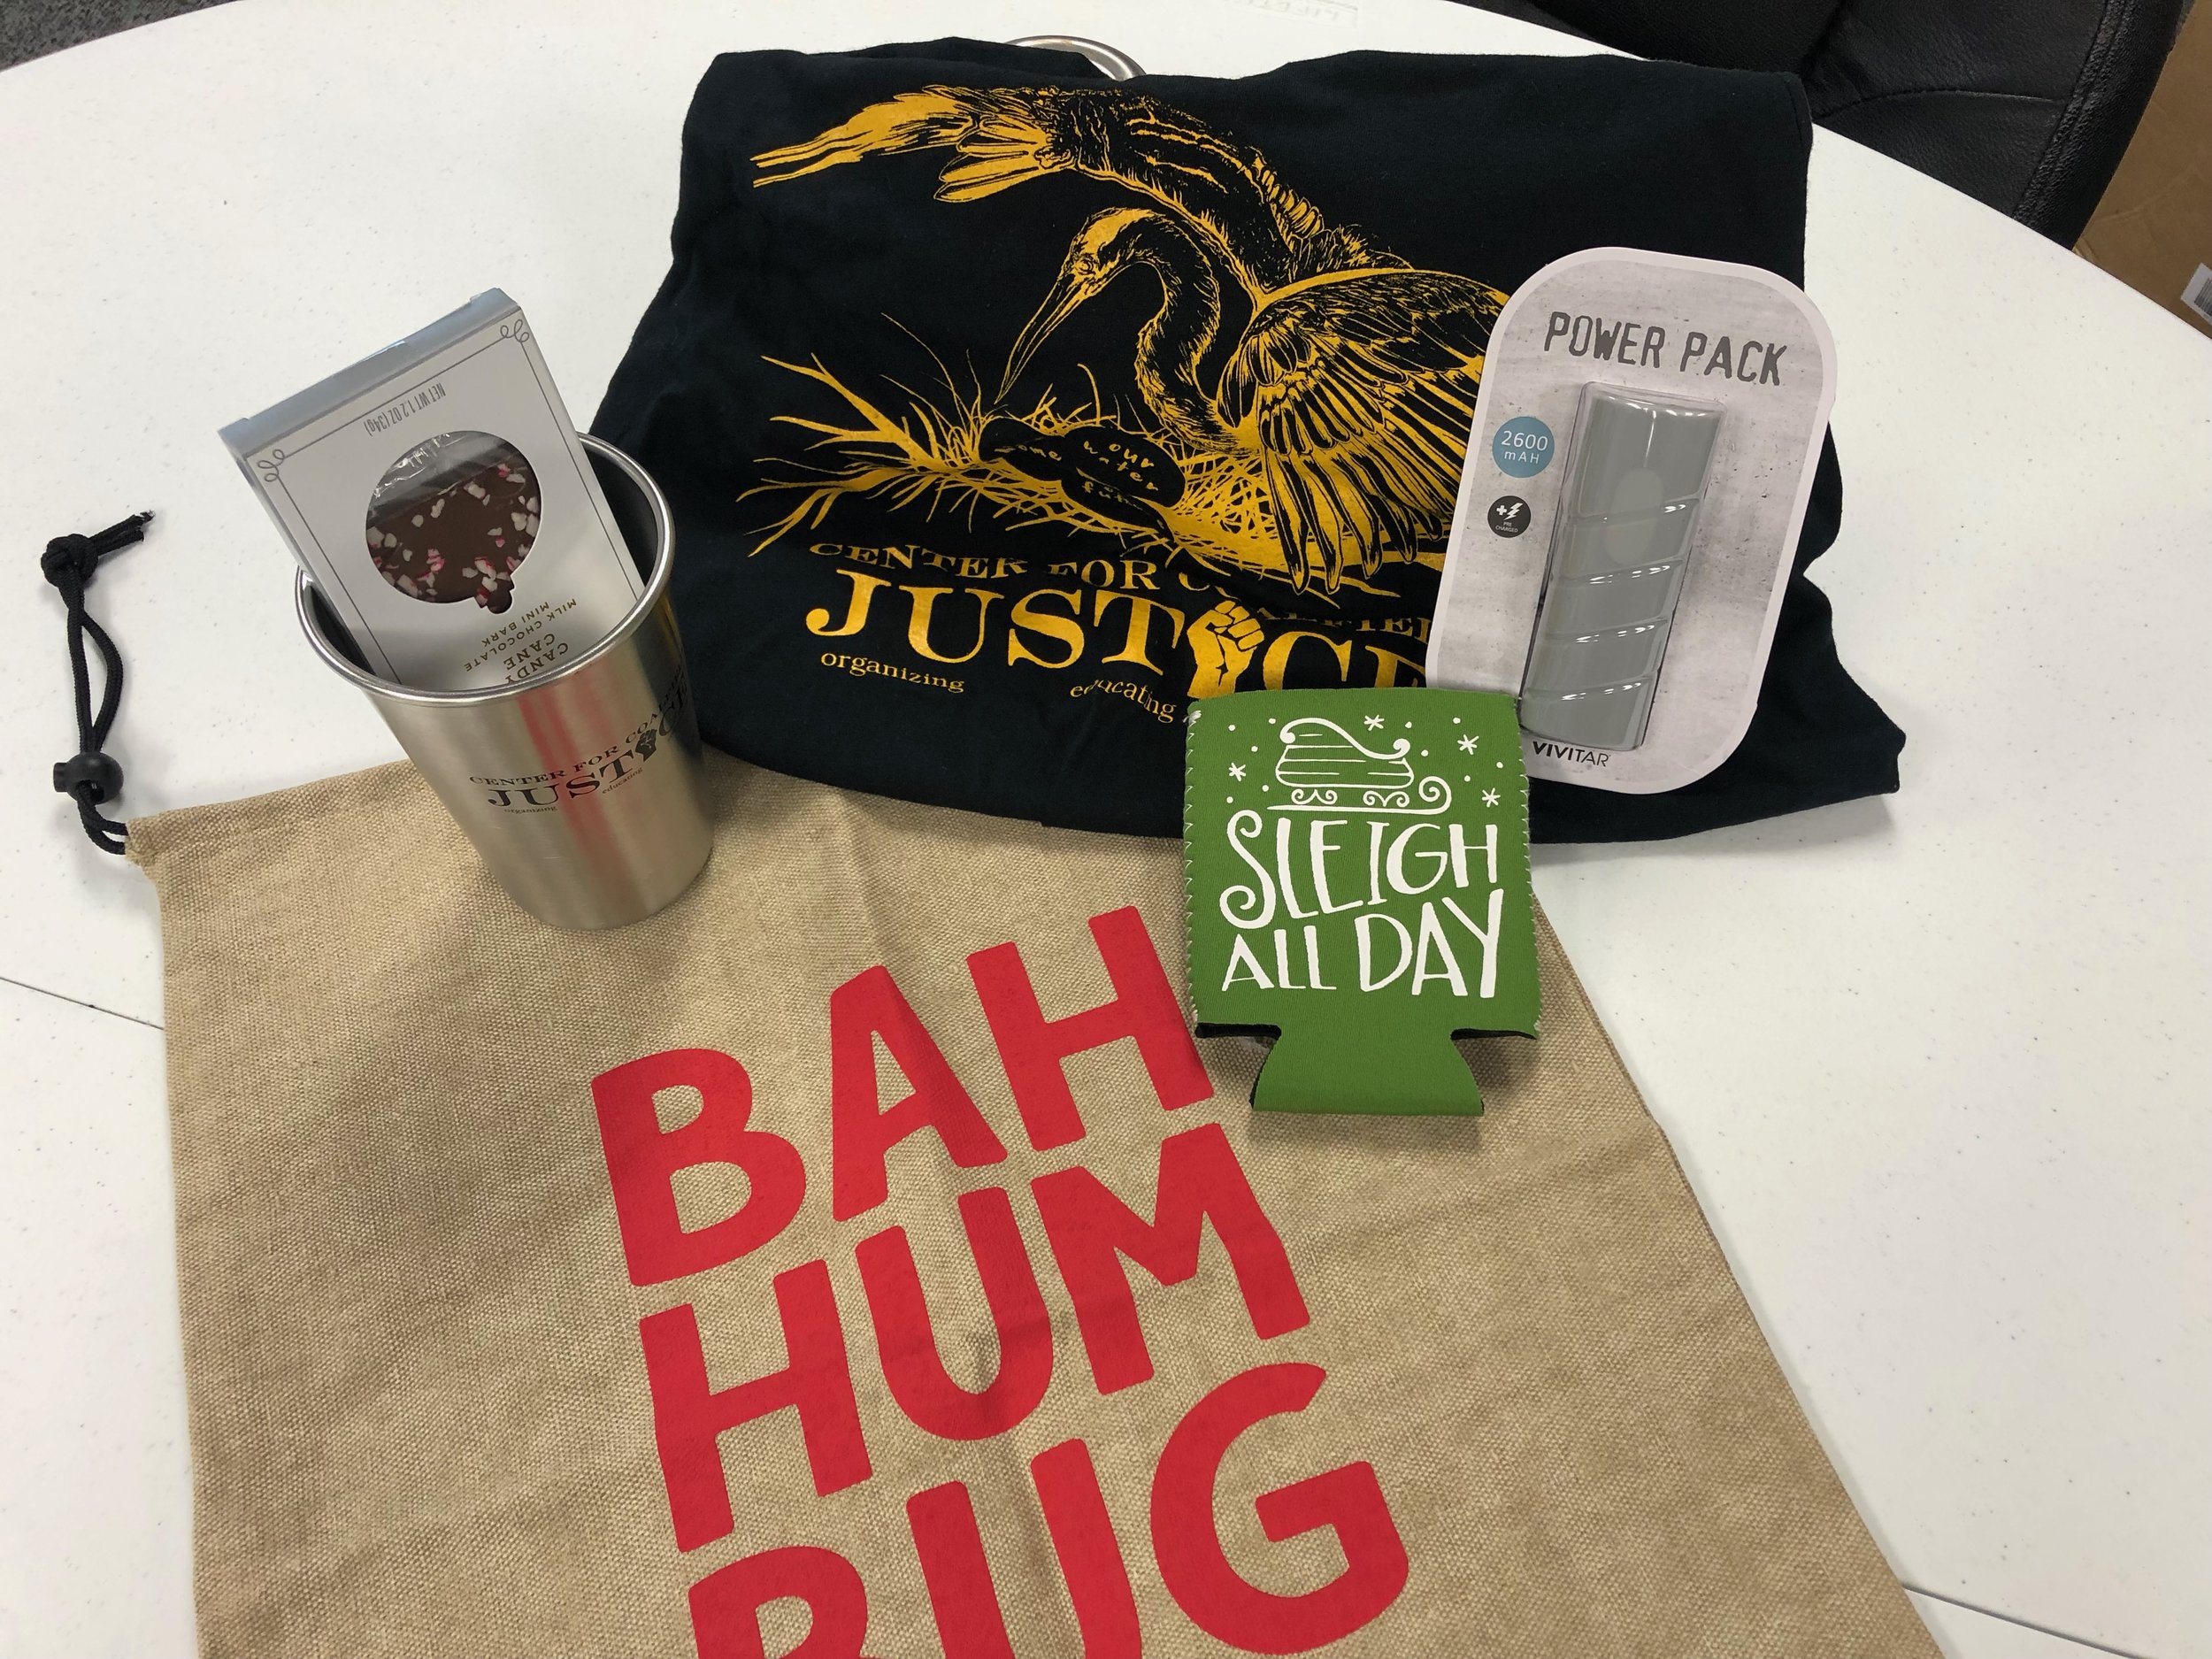 Ugly Sweater Contest Prize: CCJ tshirt and clean kanteen mug, peppermint chocolate, portable power pack, holiday coozie, and Bah Hum Bug gift bag.